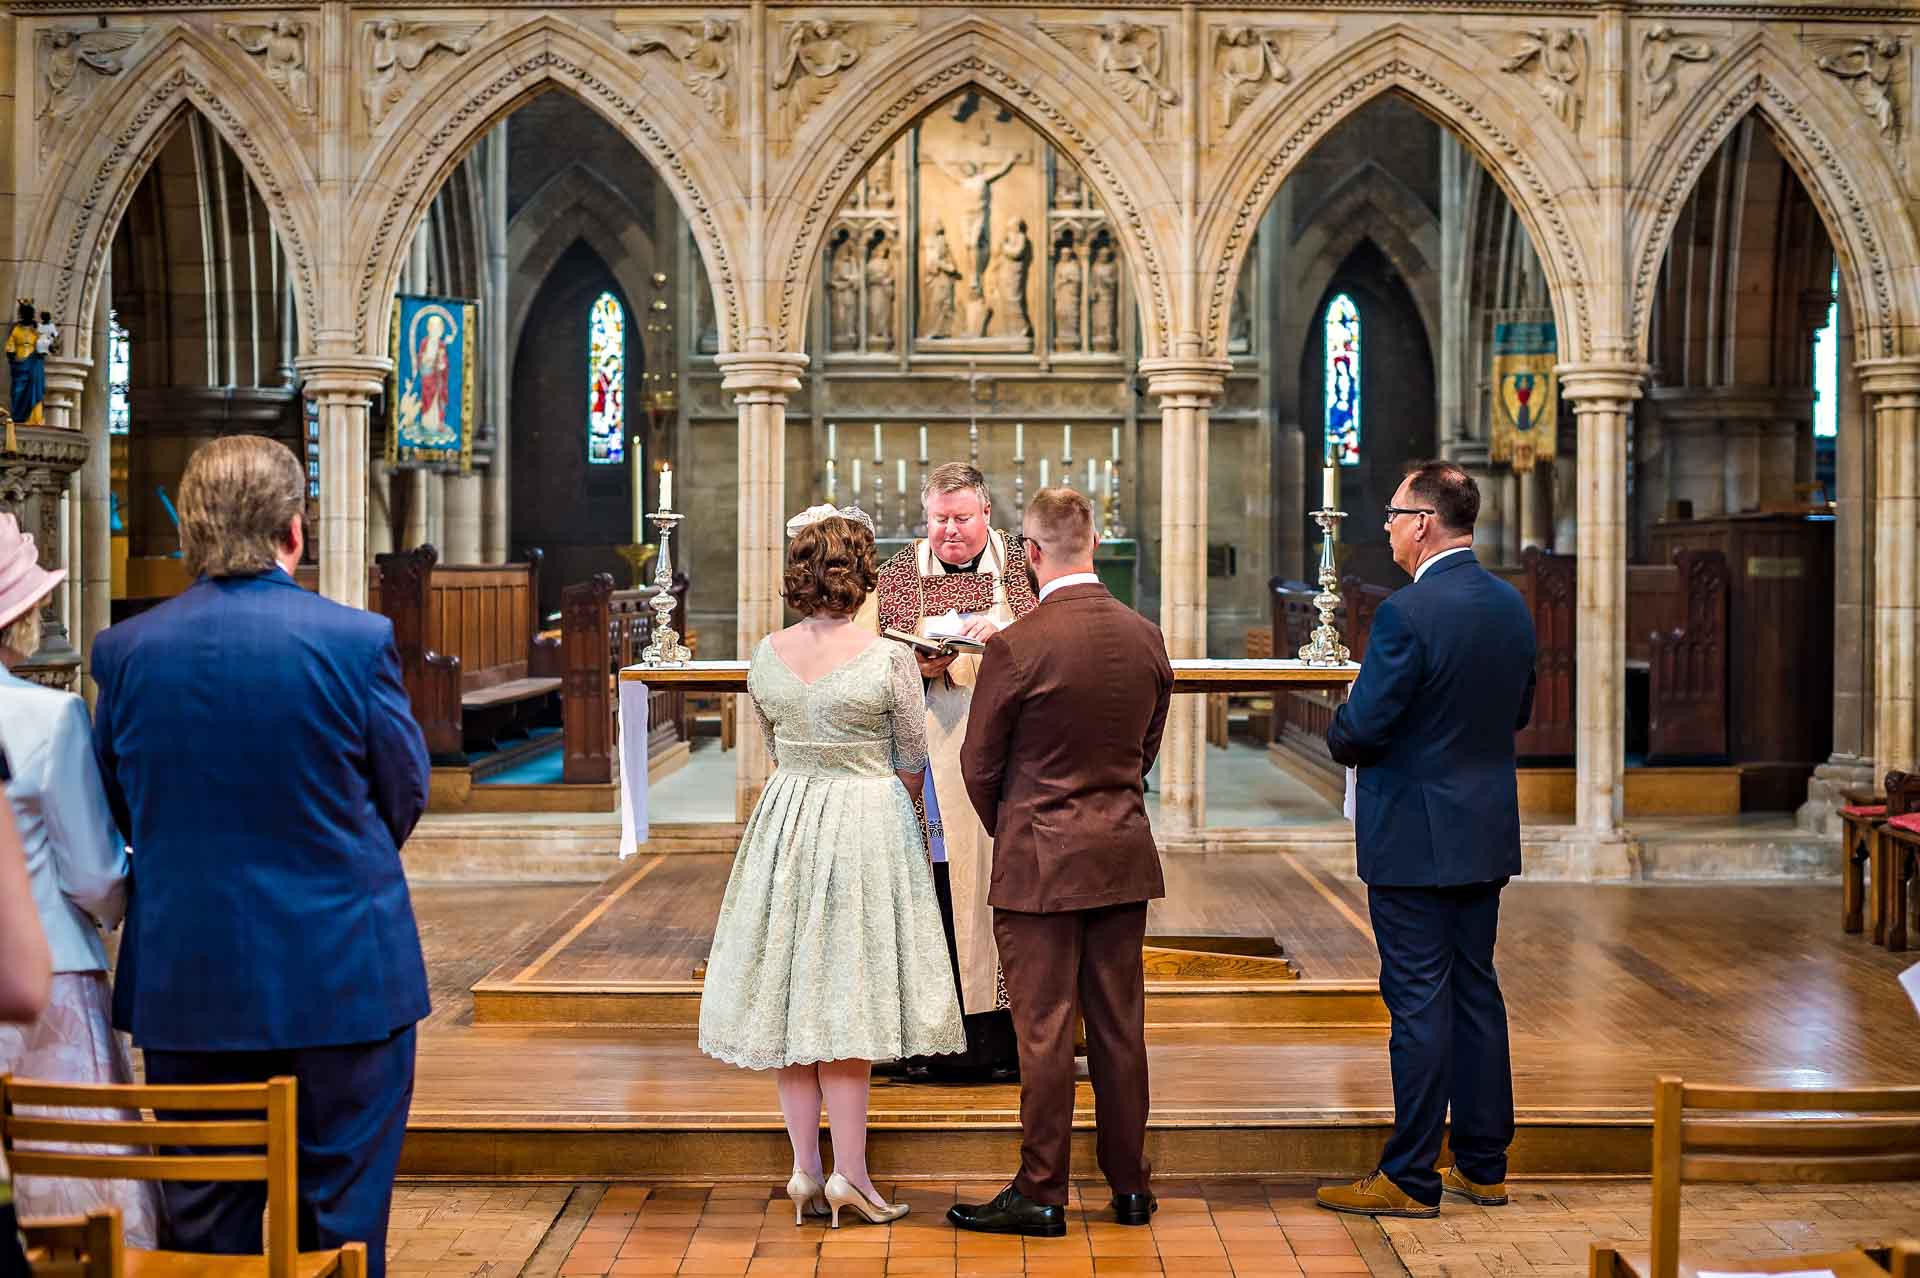 Wedding vows at church in Crystal Palace